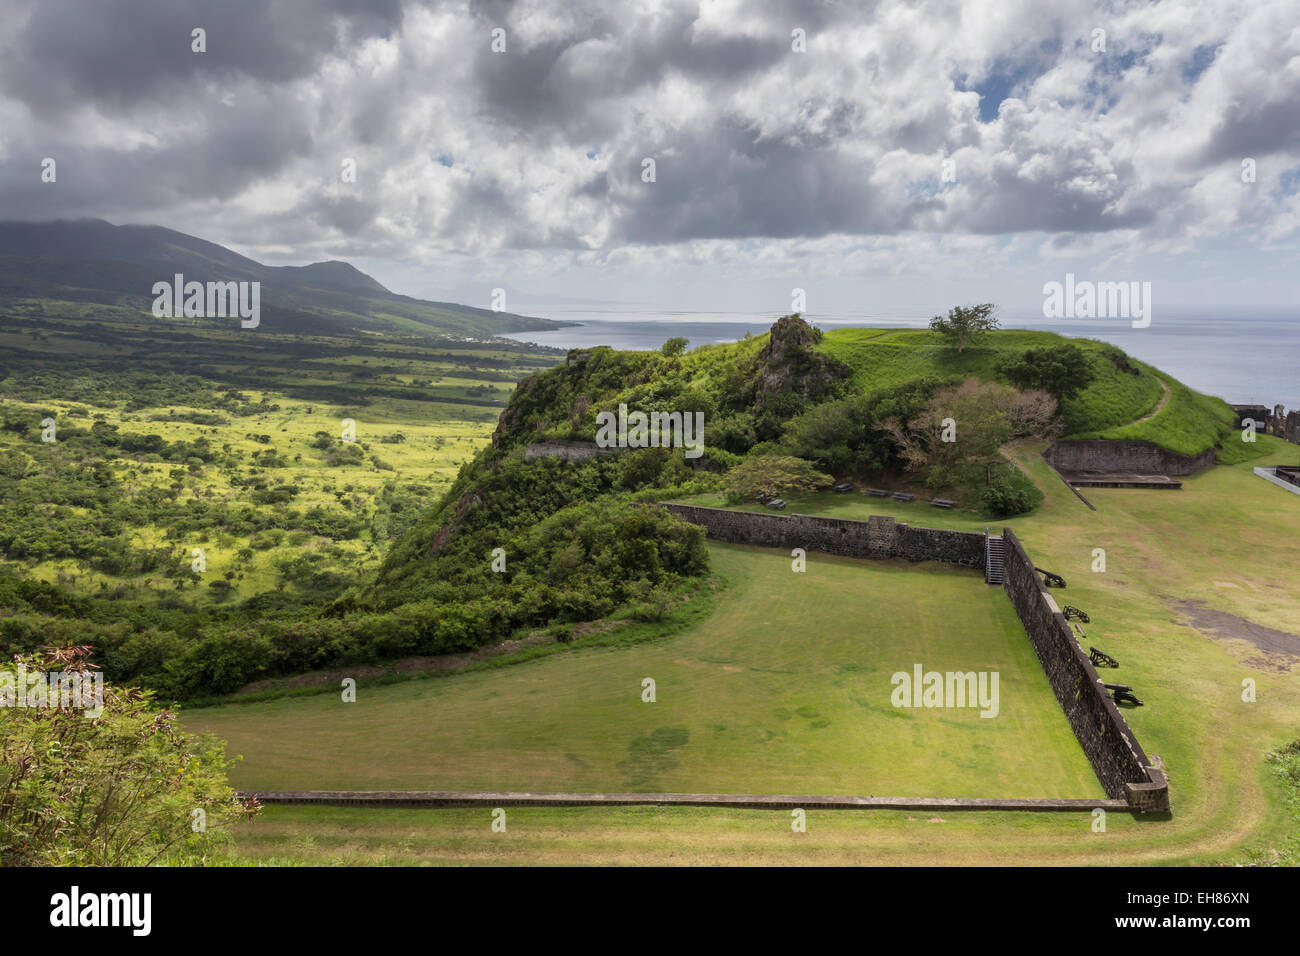 Cannons, ruins and green hills, Brimstone Hill Fortress, UNESCO, St. Kitts, St. Kitts and Nevis, Caribbean, Central America Stock Photo